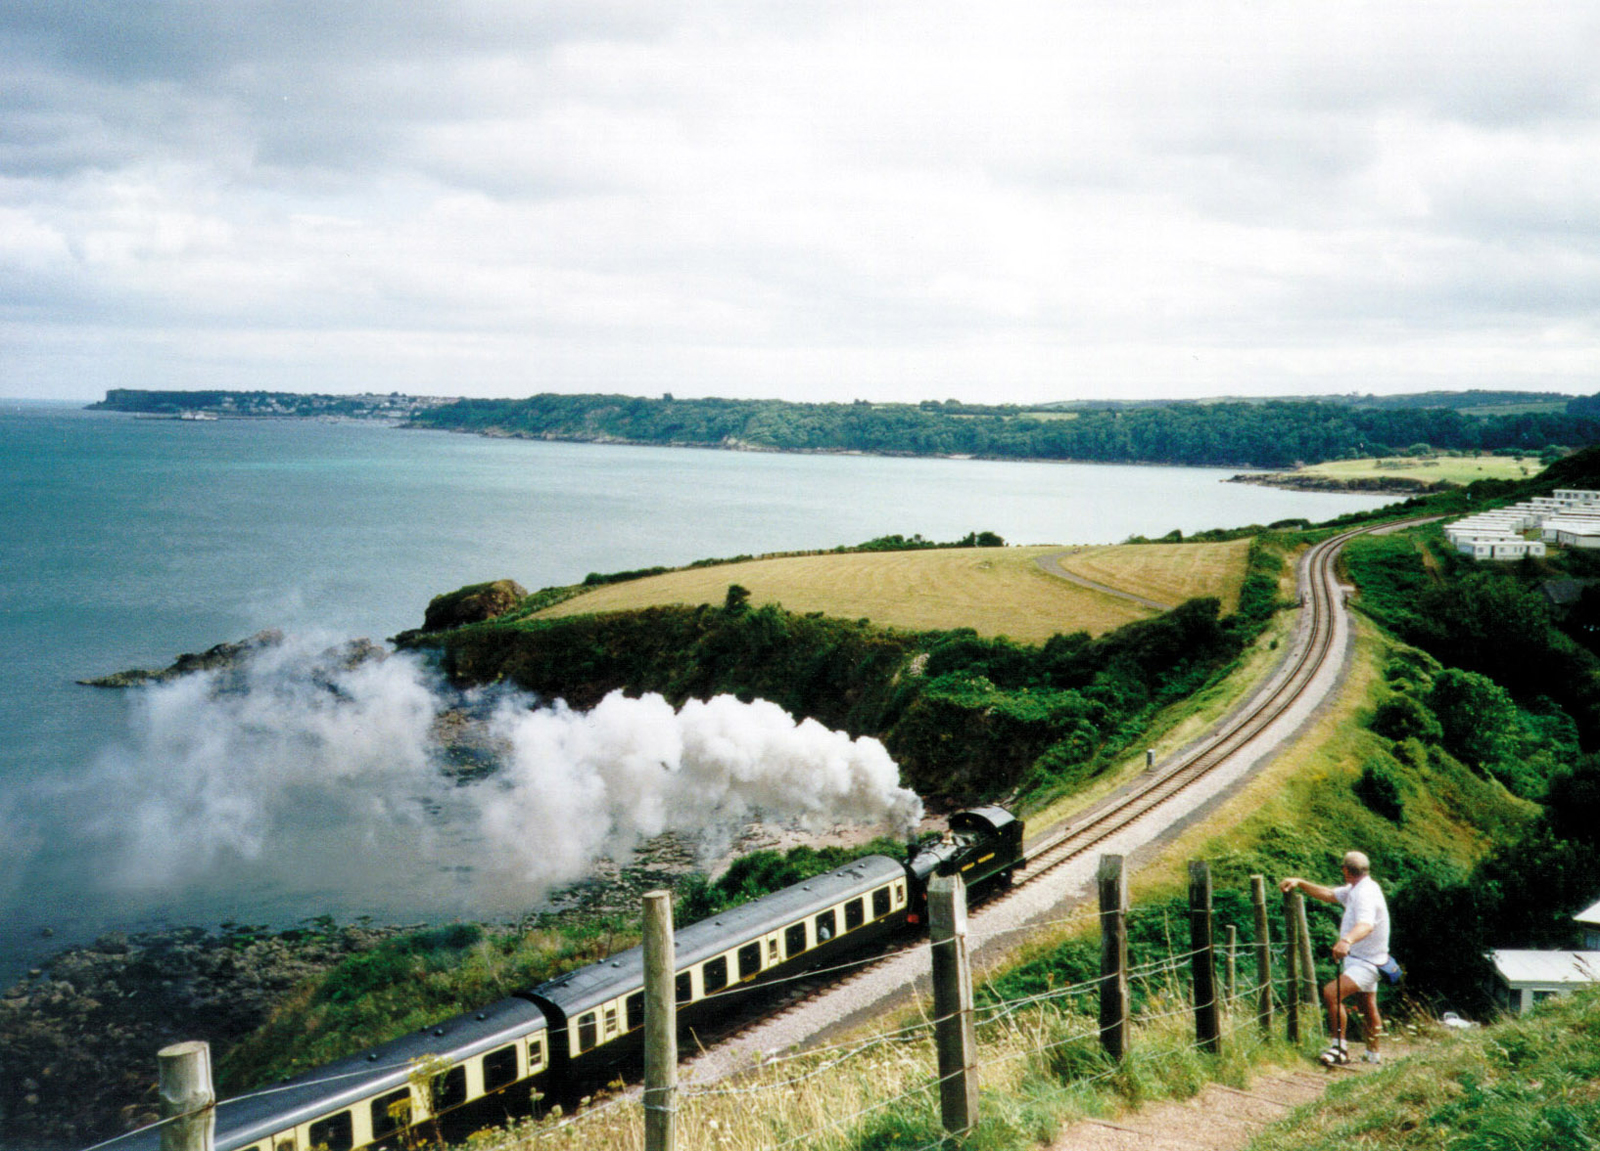 The Dartmouth Steam Railway on The English Riviera. An attraction that is easily accessed from The Hesketh Crescent Apartment